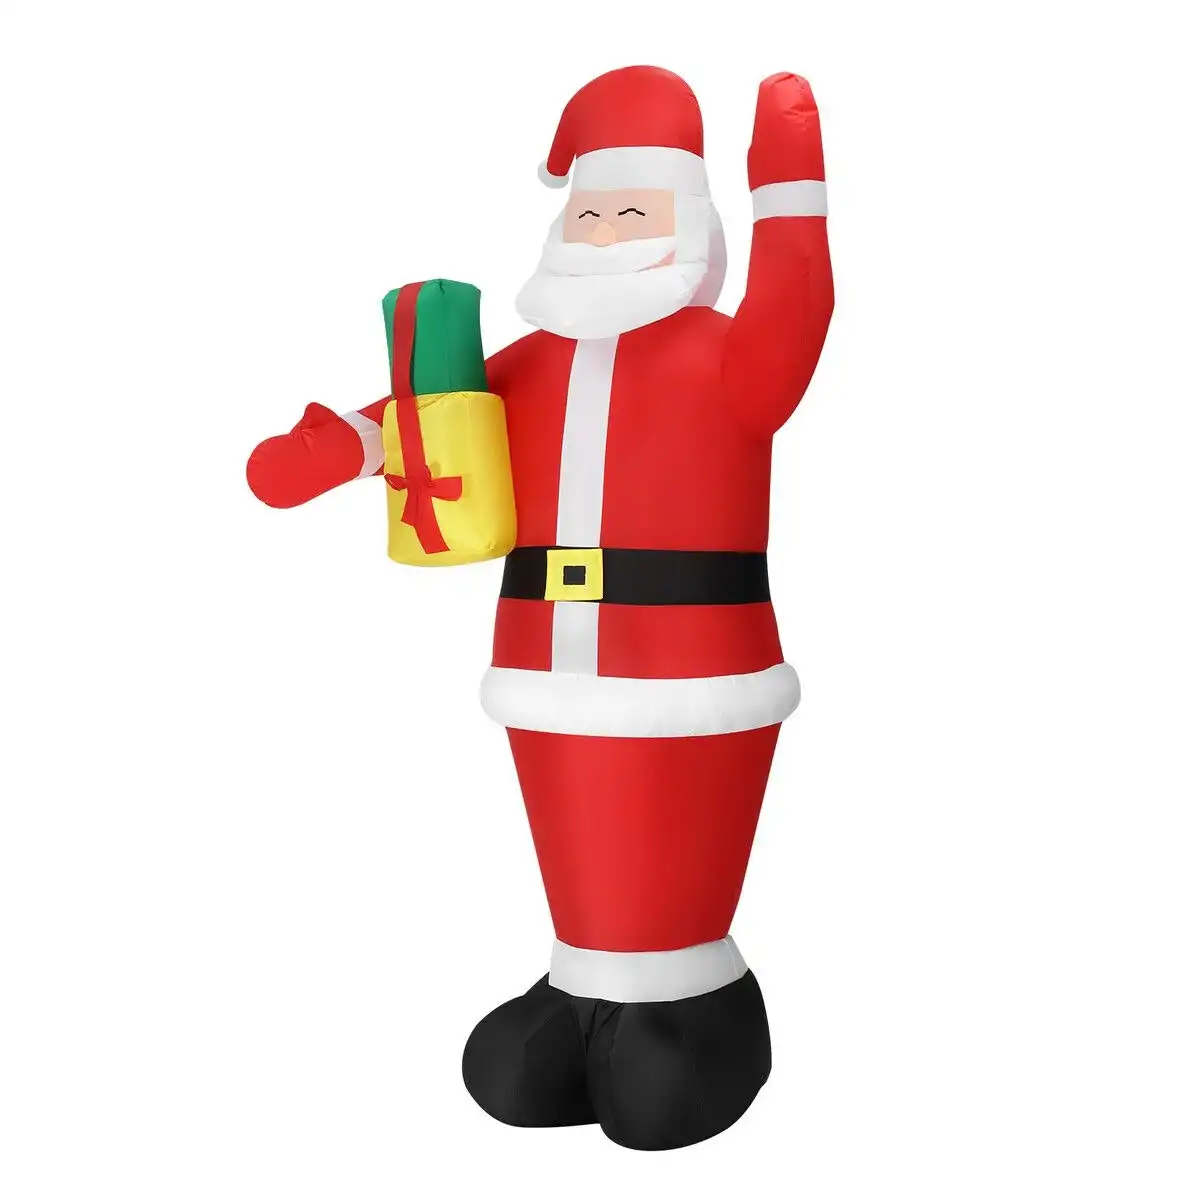 Solight Christmas Santa Claus Decor Inflatable Decoration Xmas Light Holiday Ornament Blow Up Outdoor Indoor Garden Party Yard Built In LED 240cm